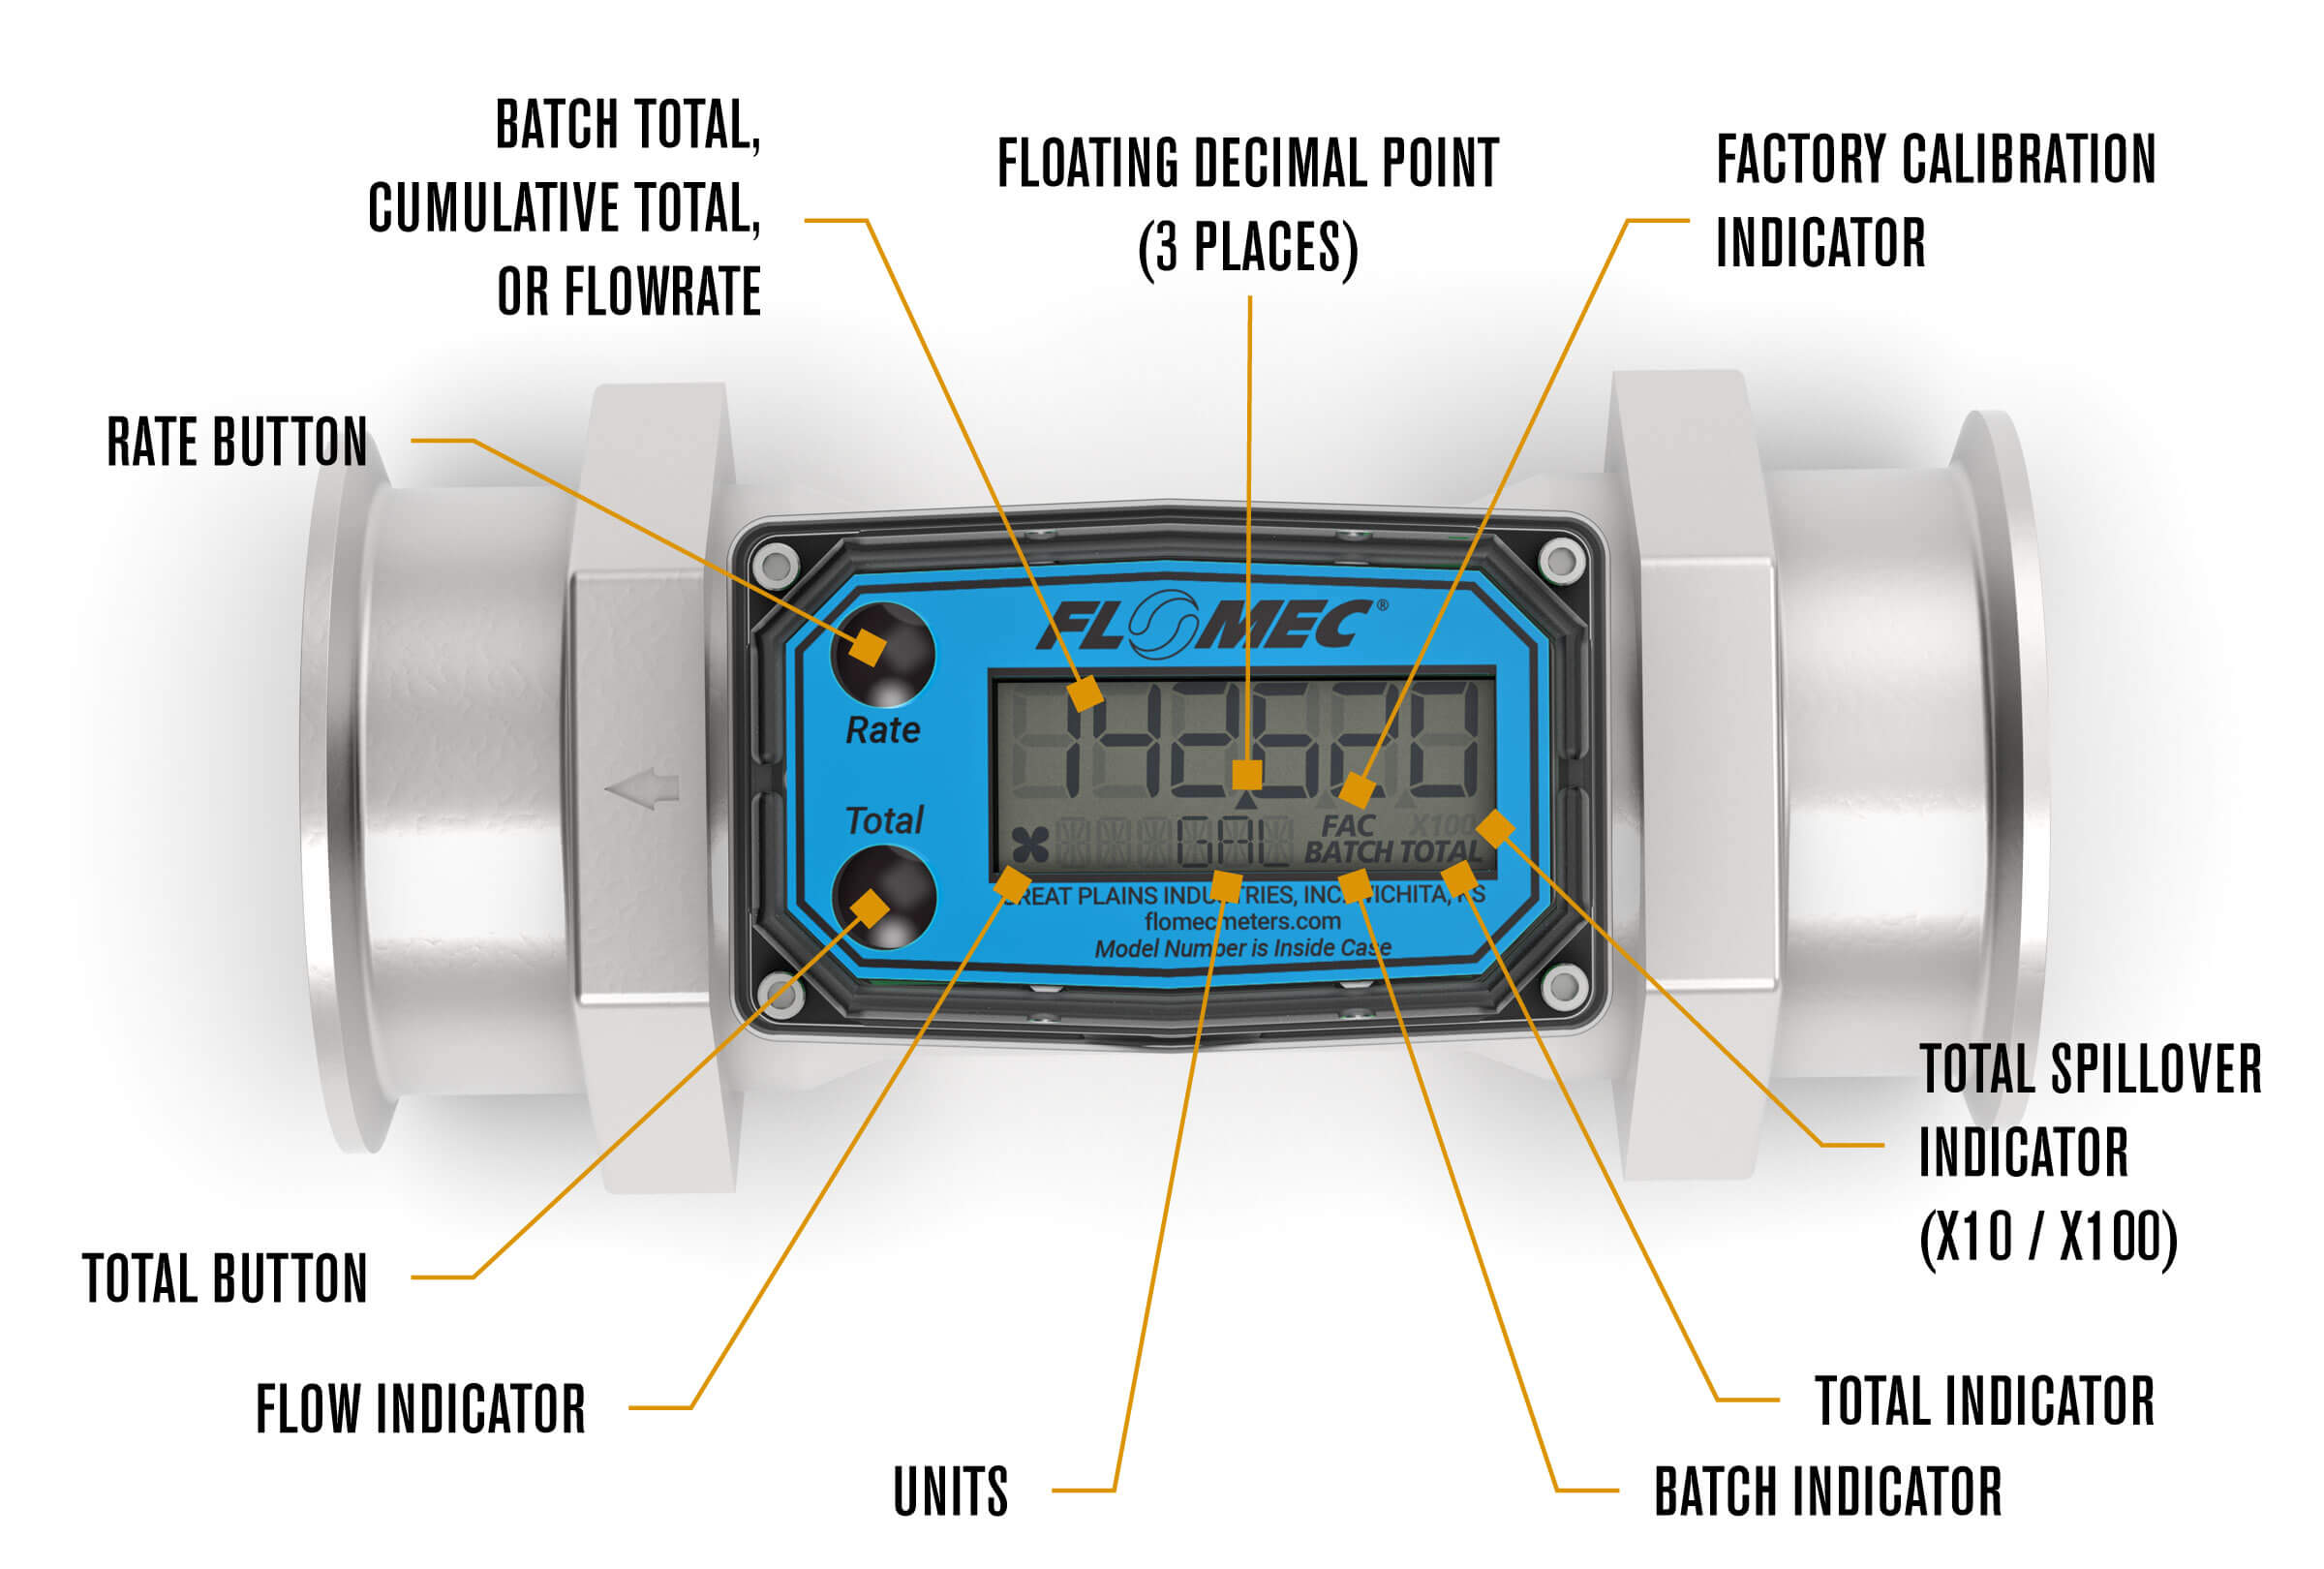 Button and display break-down of the FLOMEC G2 High-Temp Brew Meter with 2 1/2-inch tri-clamp and local digital display